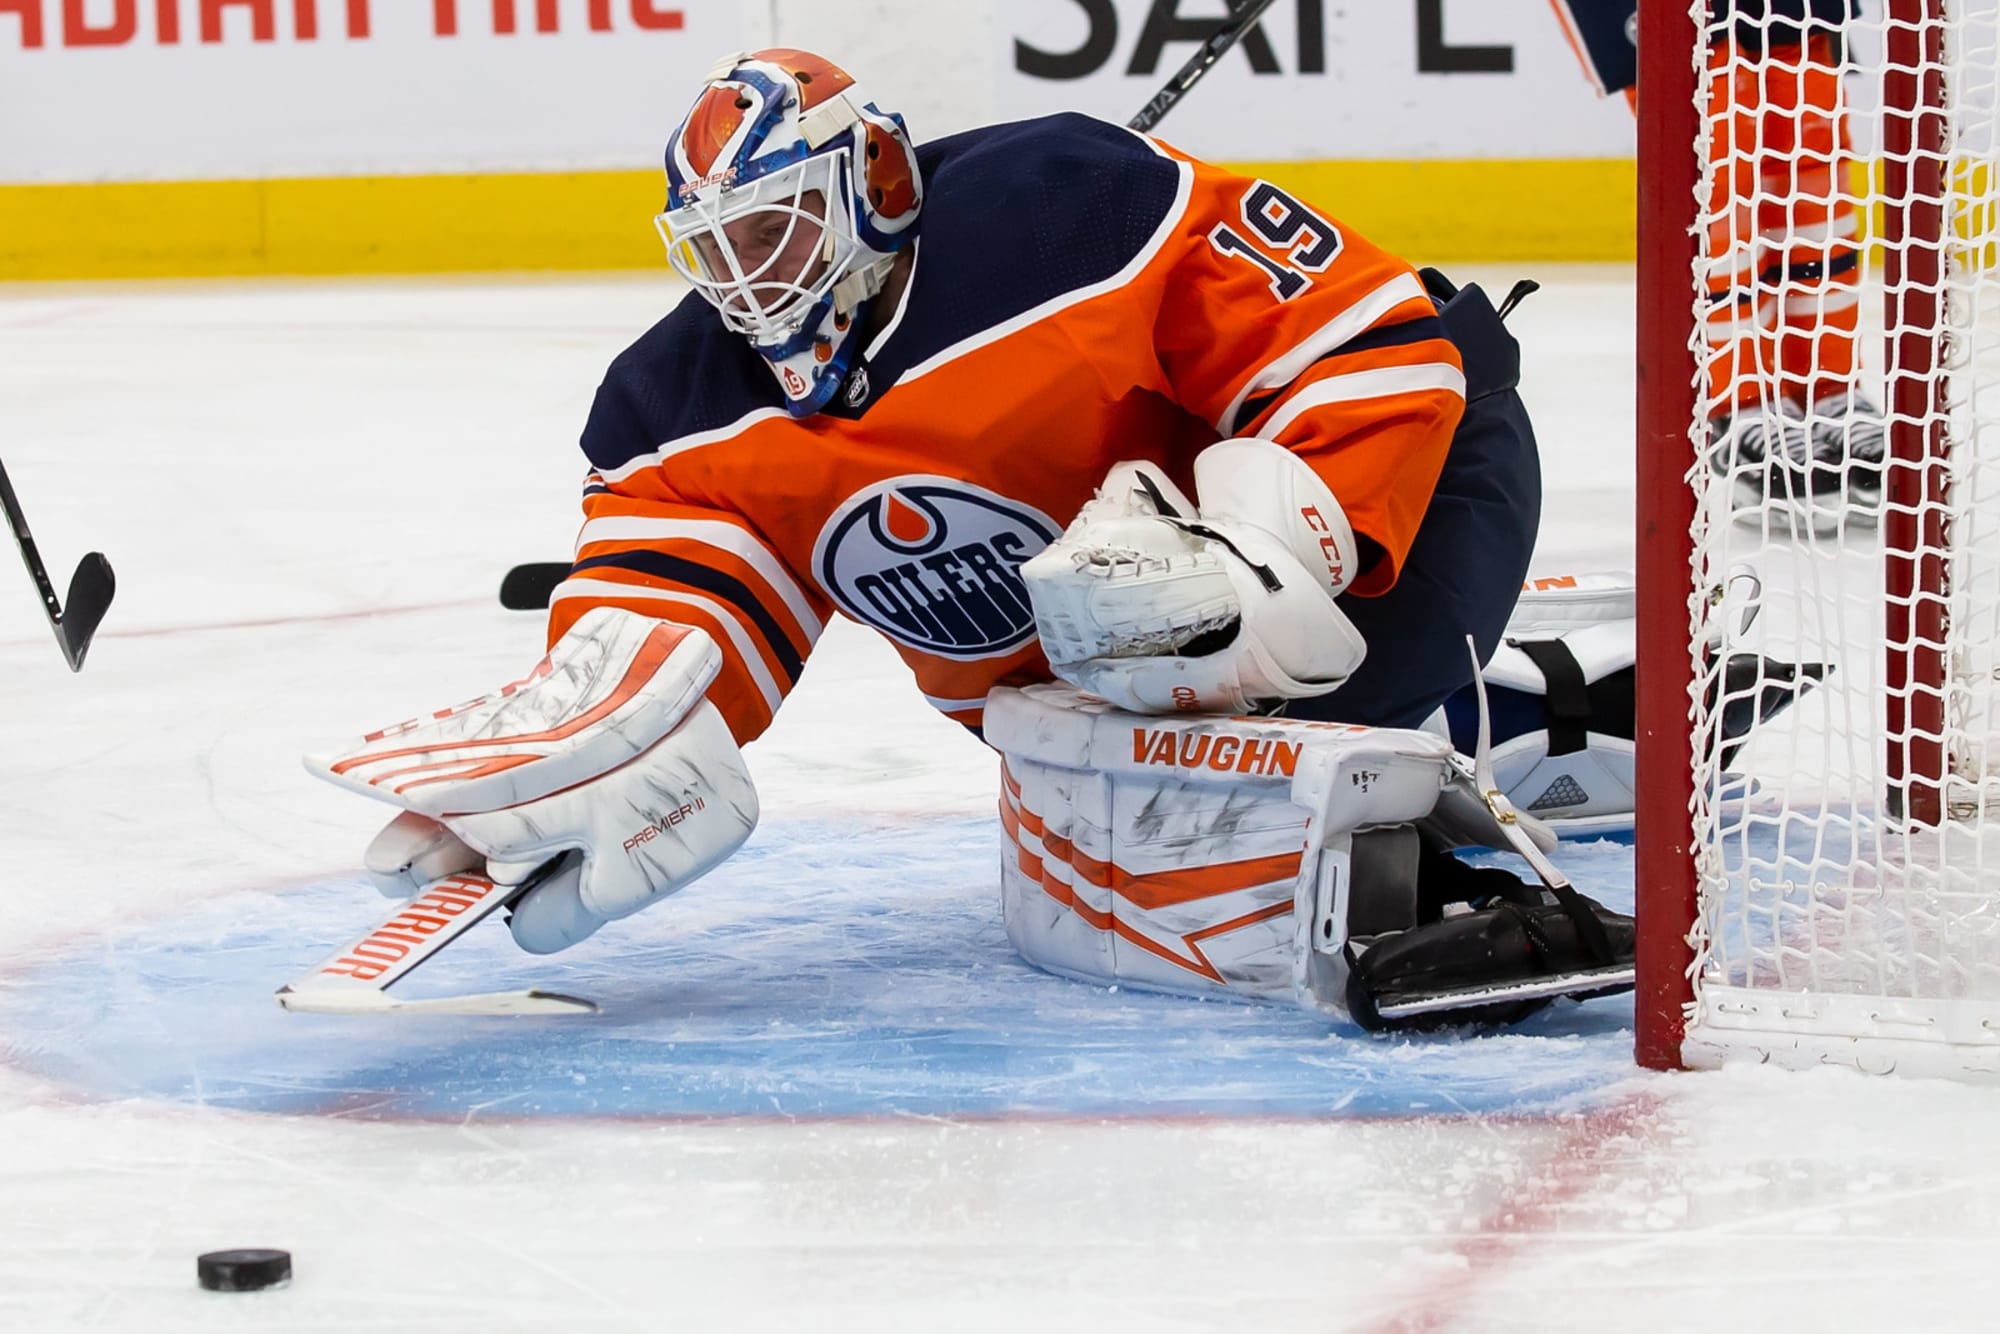 Cult of Hockey game grades: Have Oilers goalies made a big save